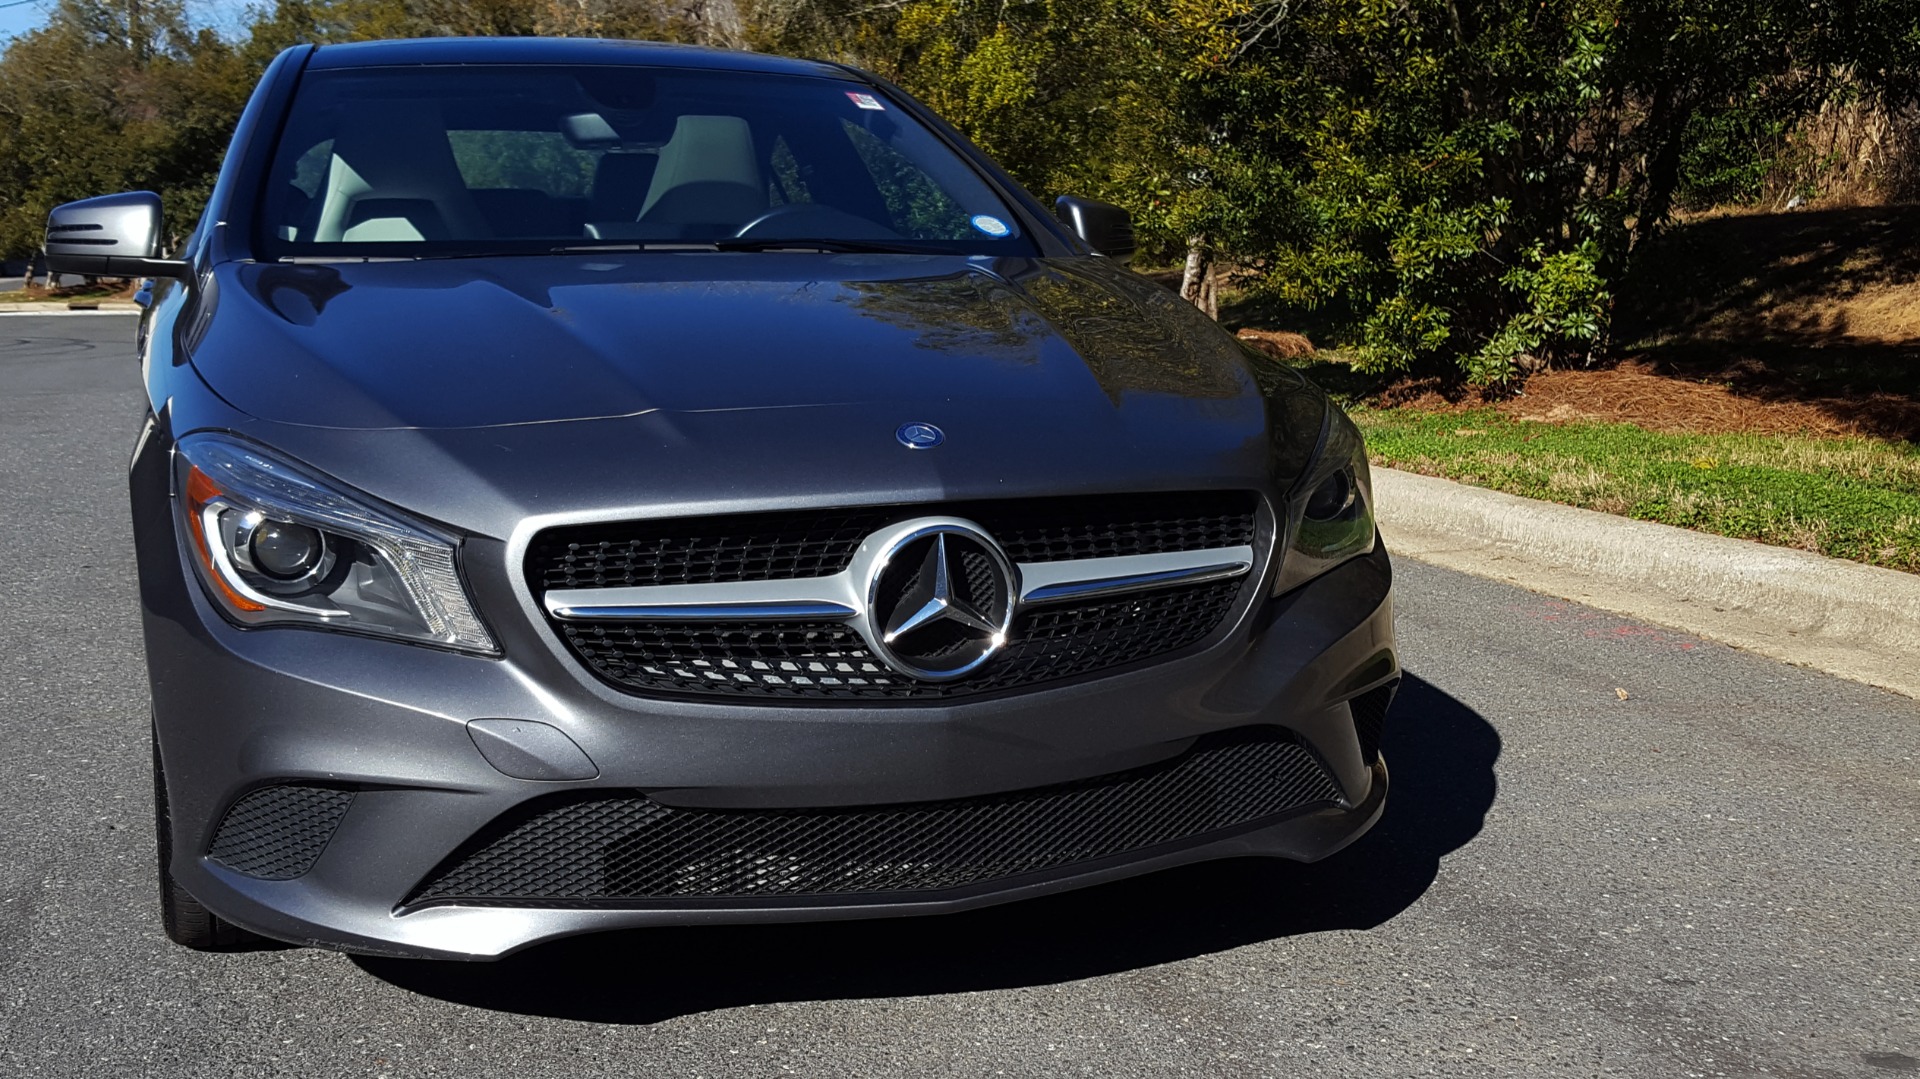 Used 2014 Mercedes-Benz CLA-CLASS CLA 250 / NAV / PANO-ROOF / BLIND SPOT ASSIST / XENON HEADLIGHTS for sale Sold at Formula Imports in Charlotte NC 28227 5